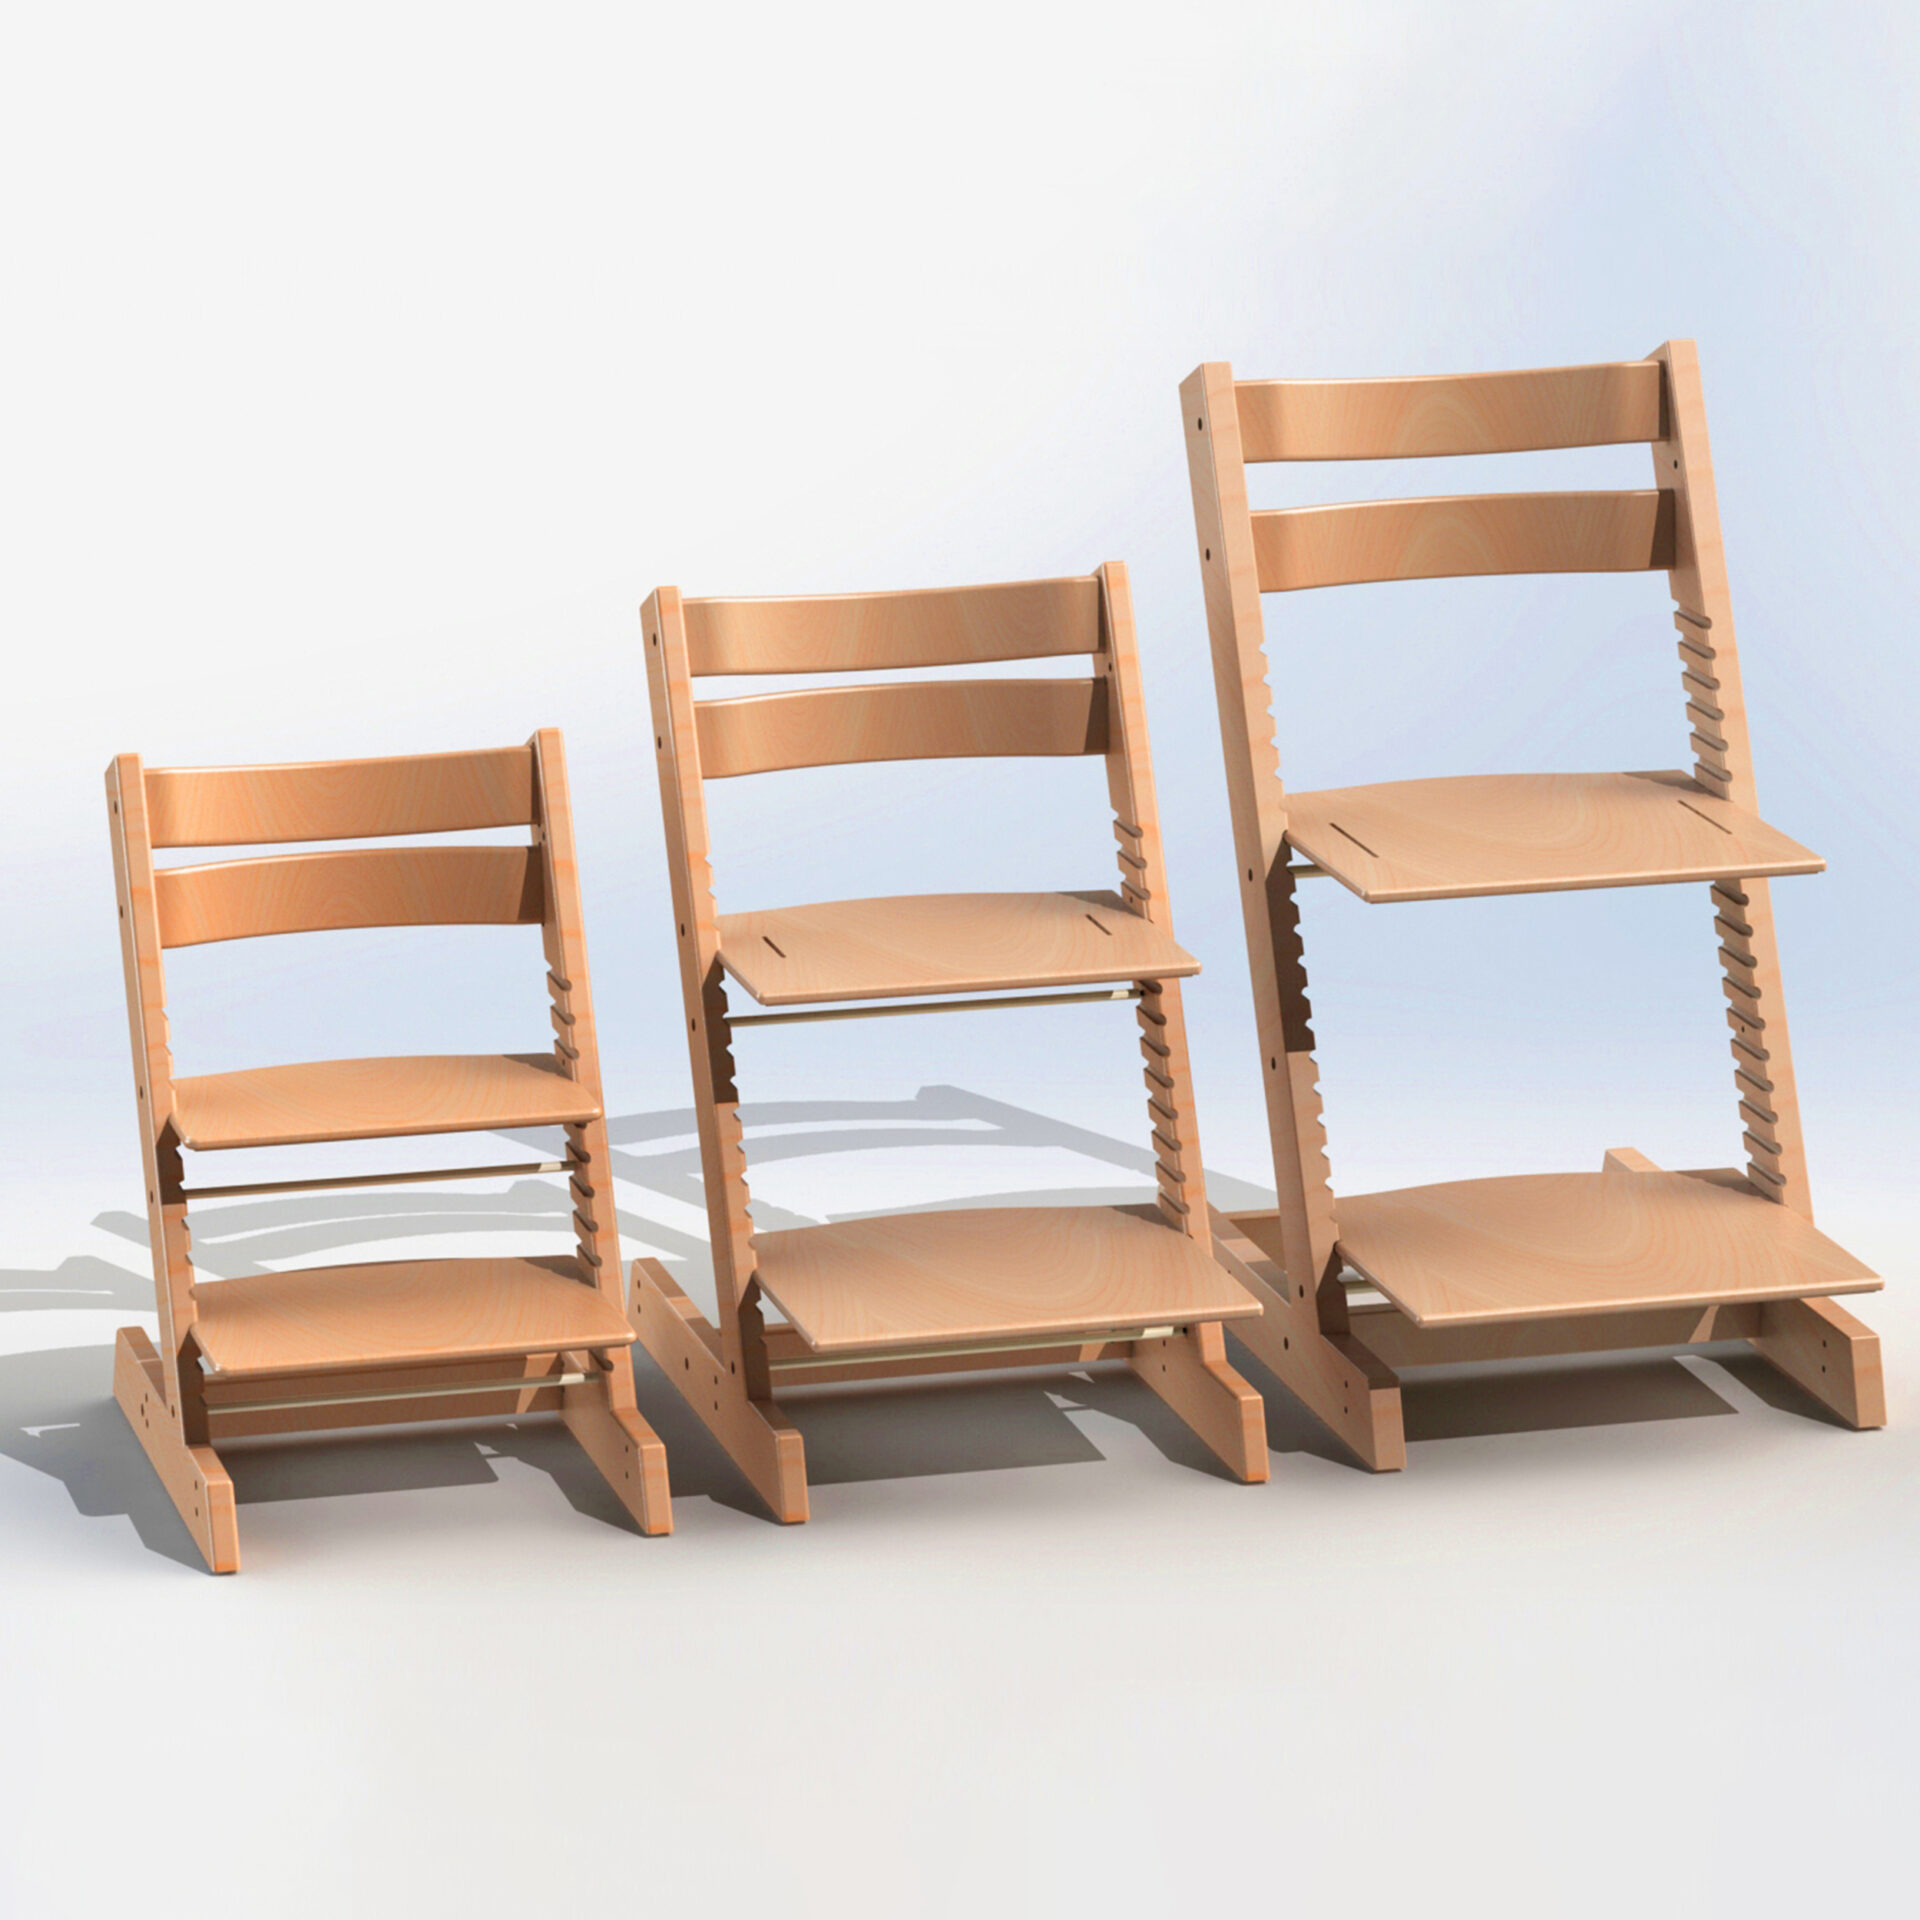 3 high chairs for children with special needs